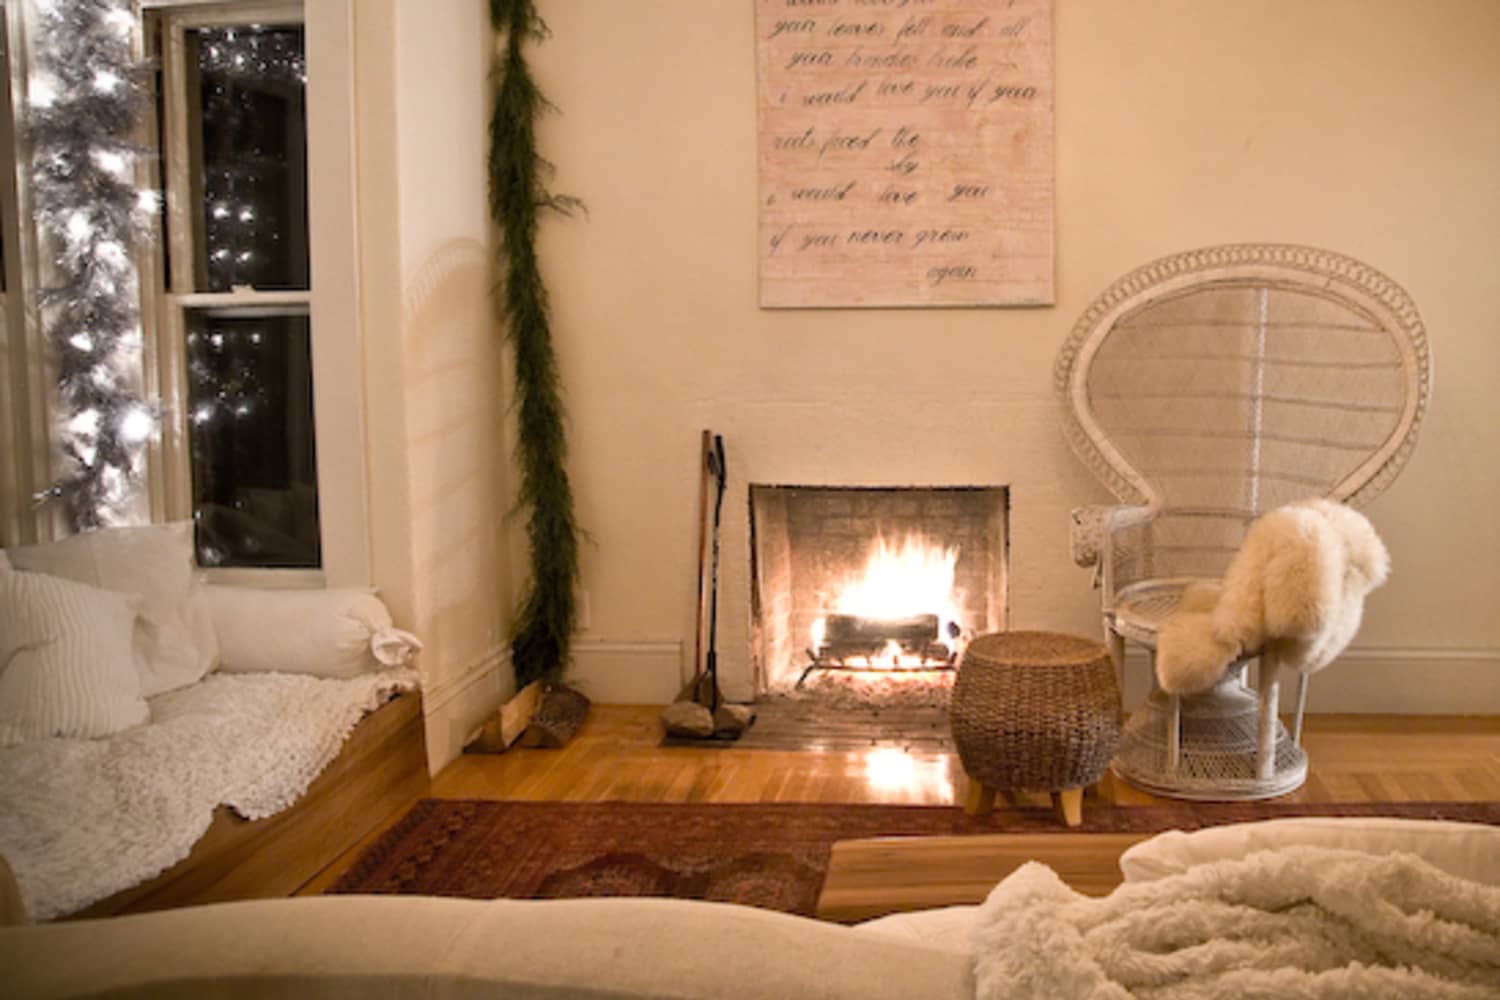 Instantly Cozier 9 Ways to Warm Up Your Winter Lighting  